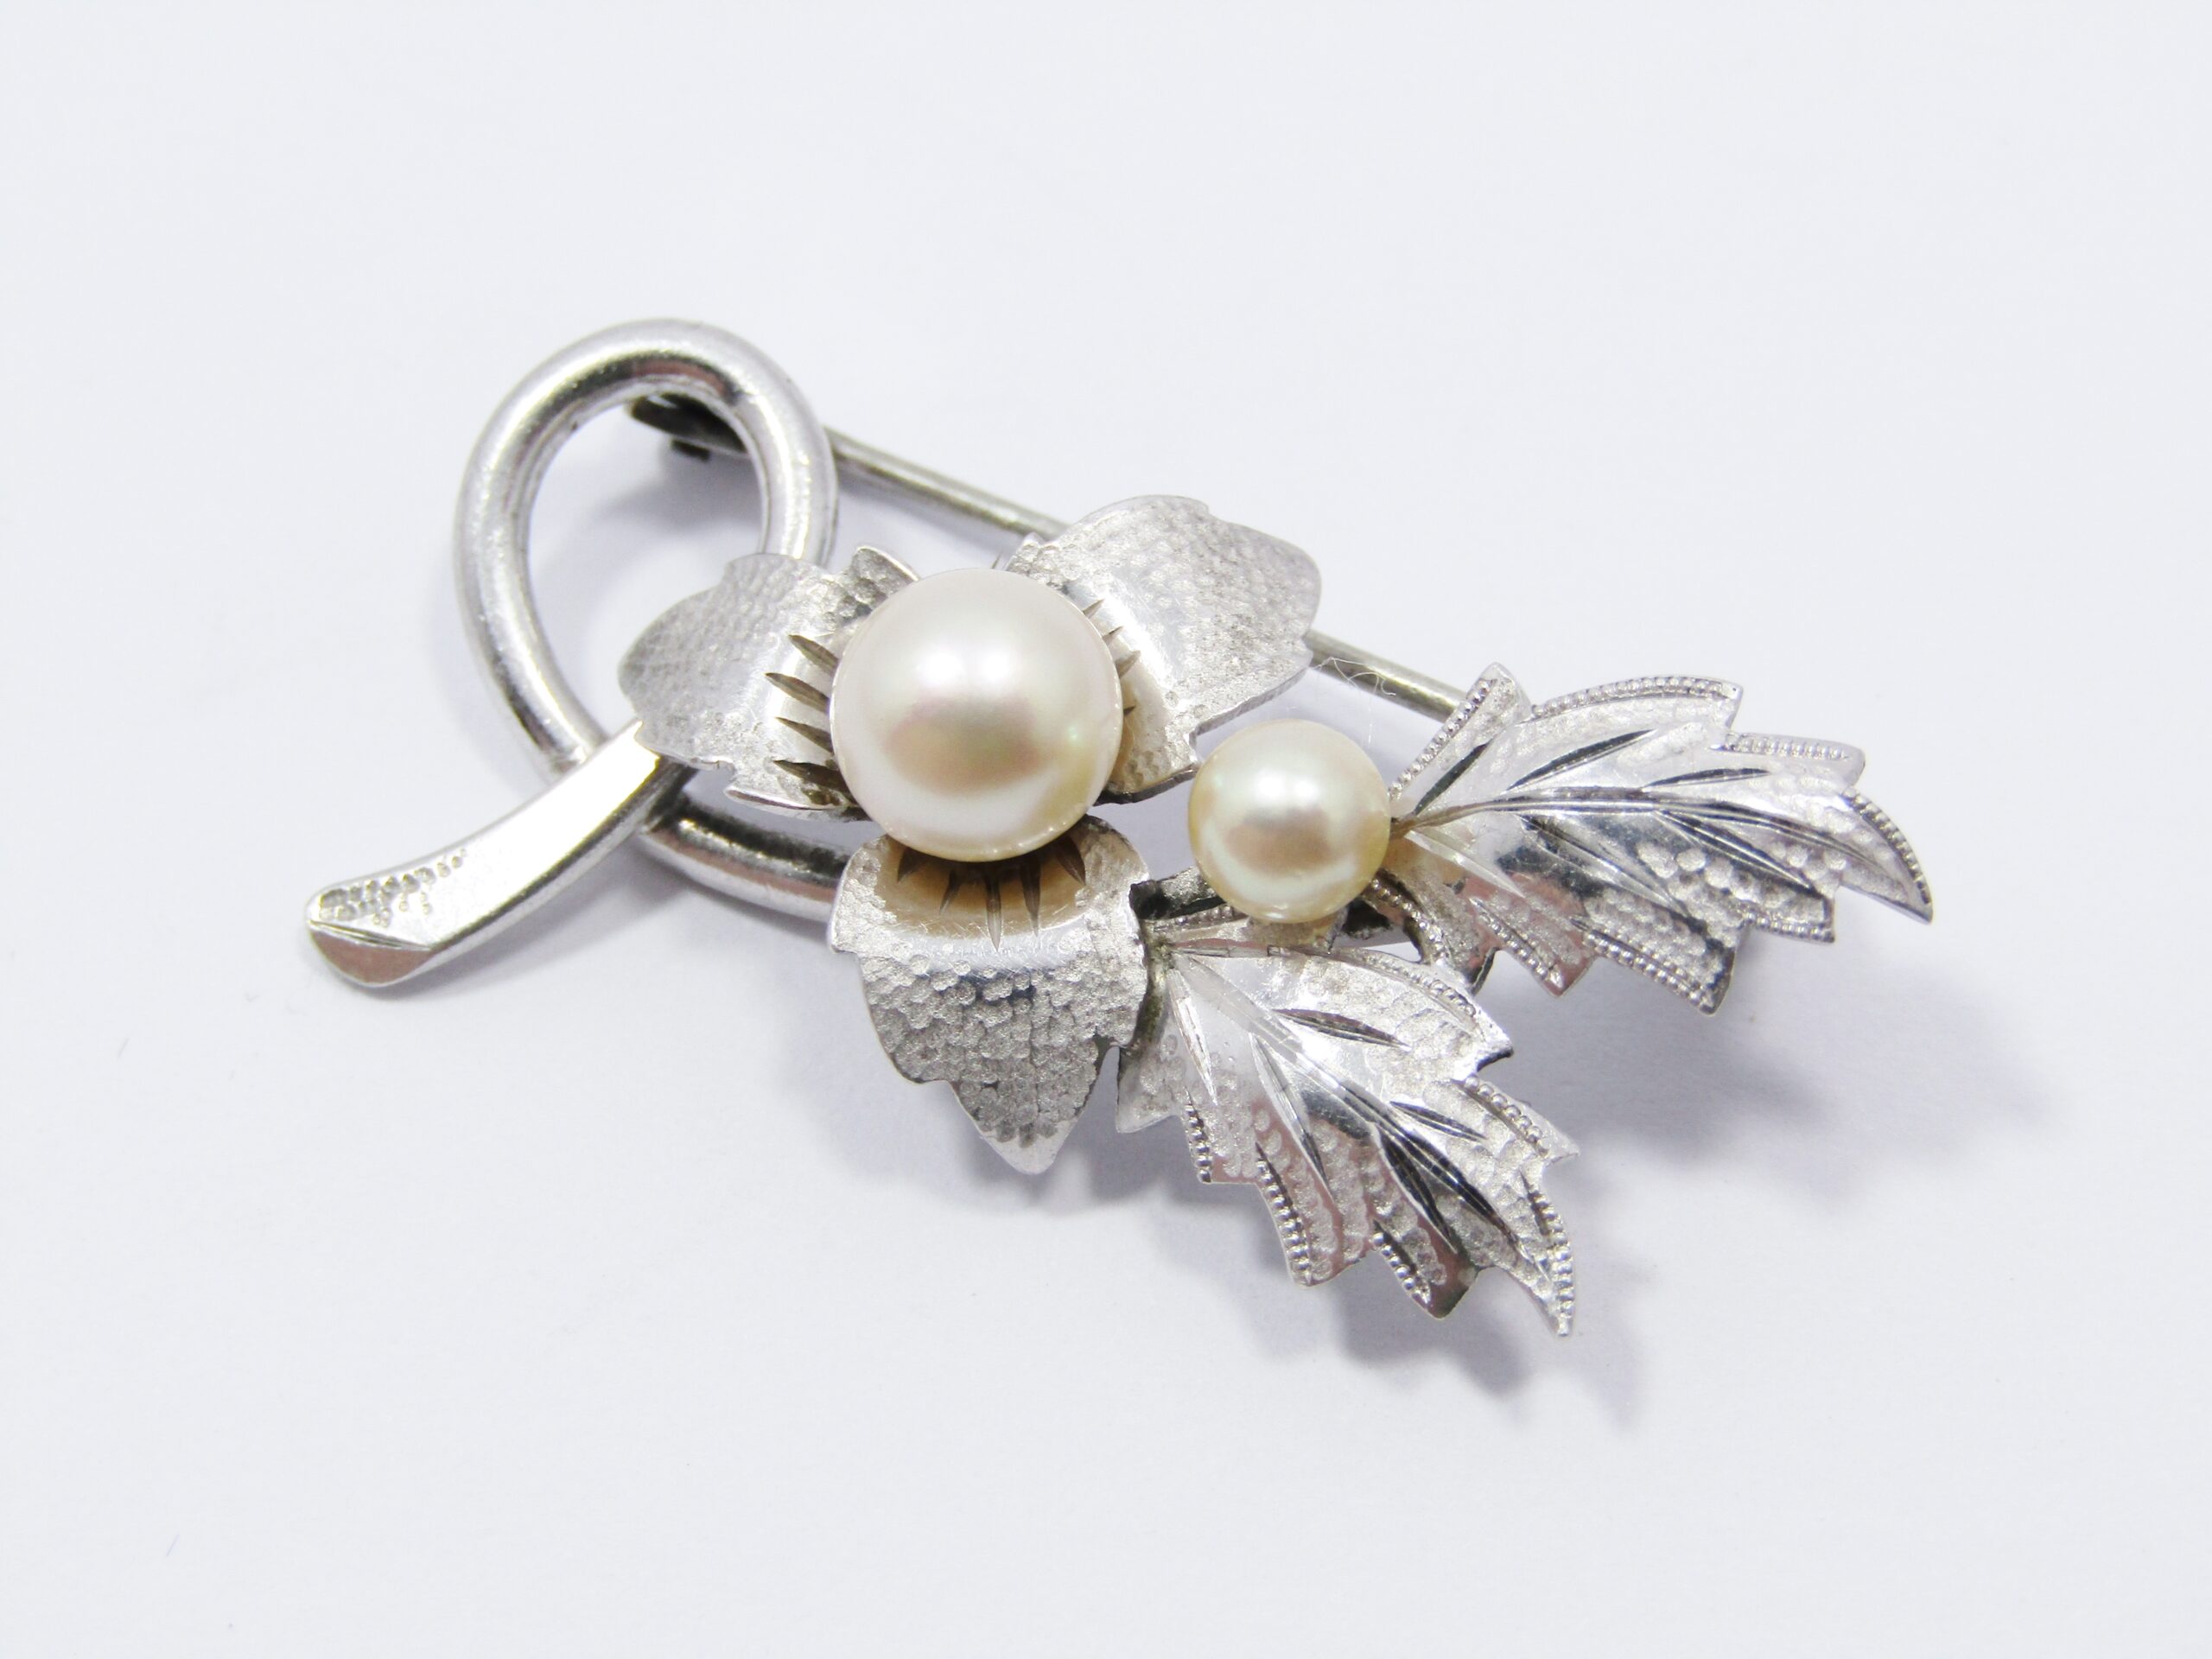 A Lovely Vintage Fresh Water Pearl Brooch in Sterling Silver